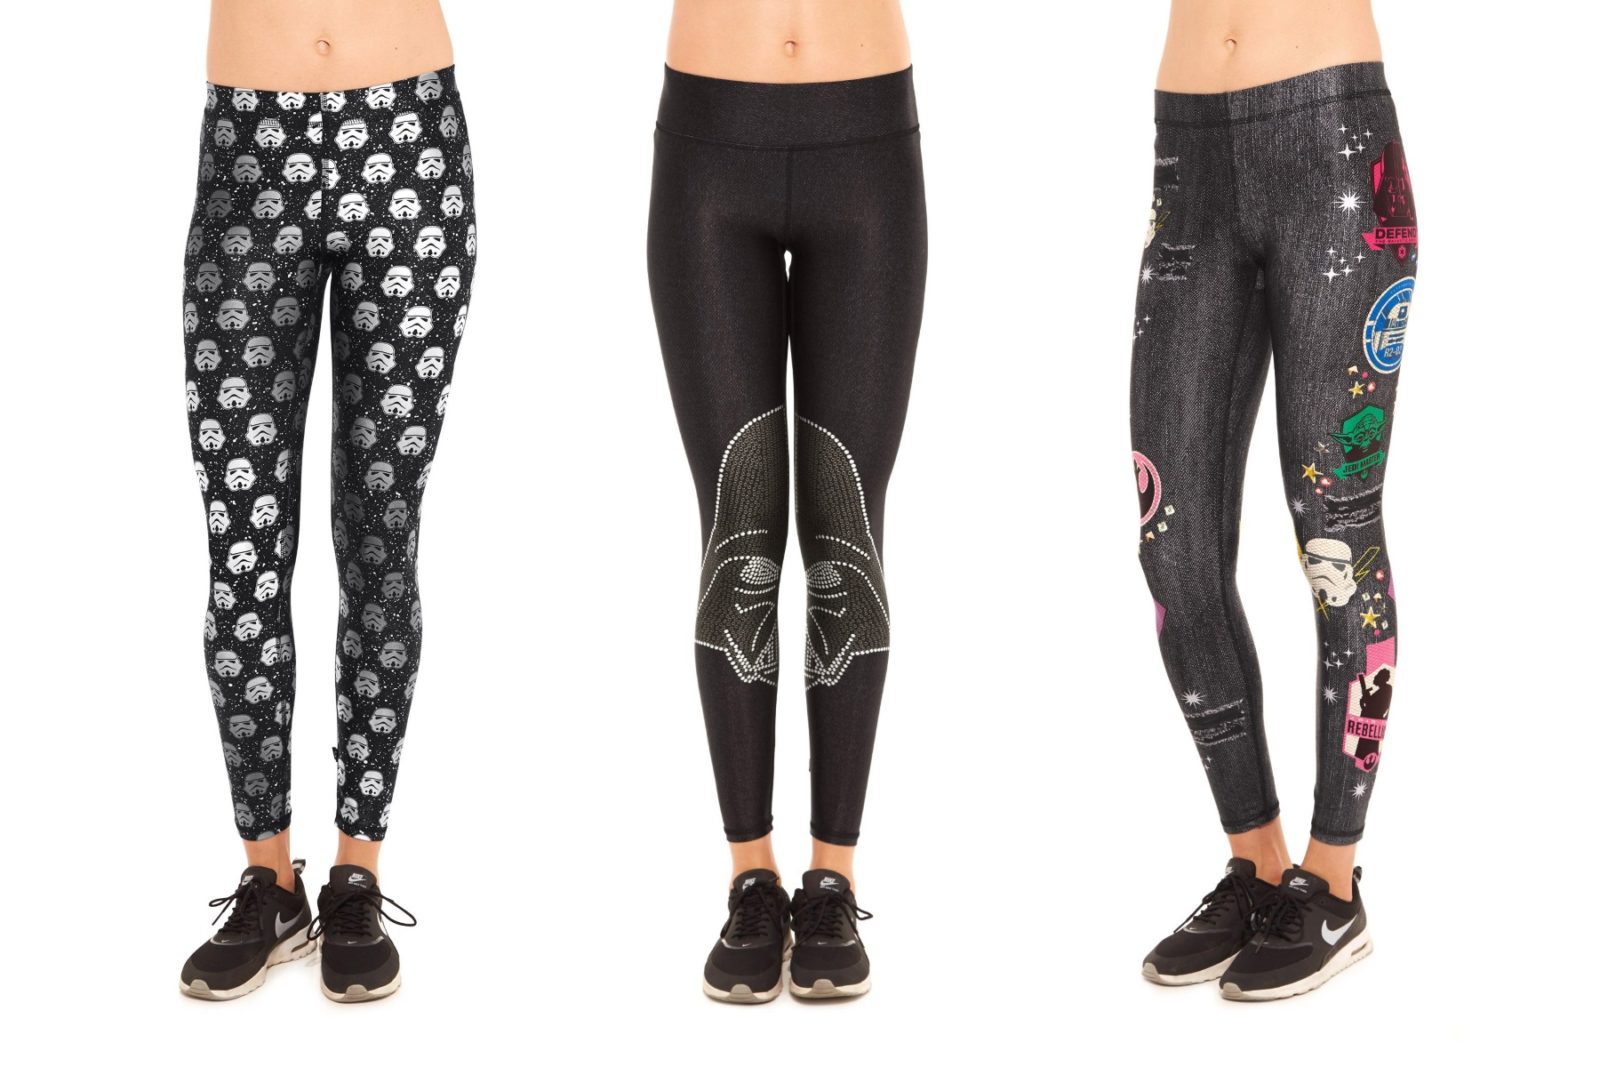 New Terez x Star Wars Leggings Collection